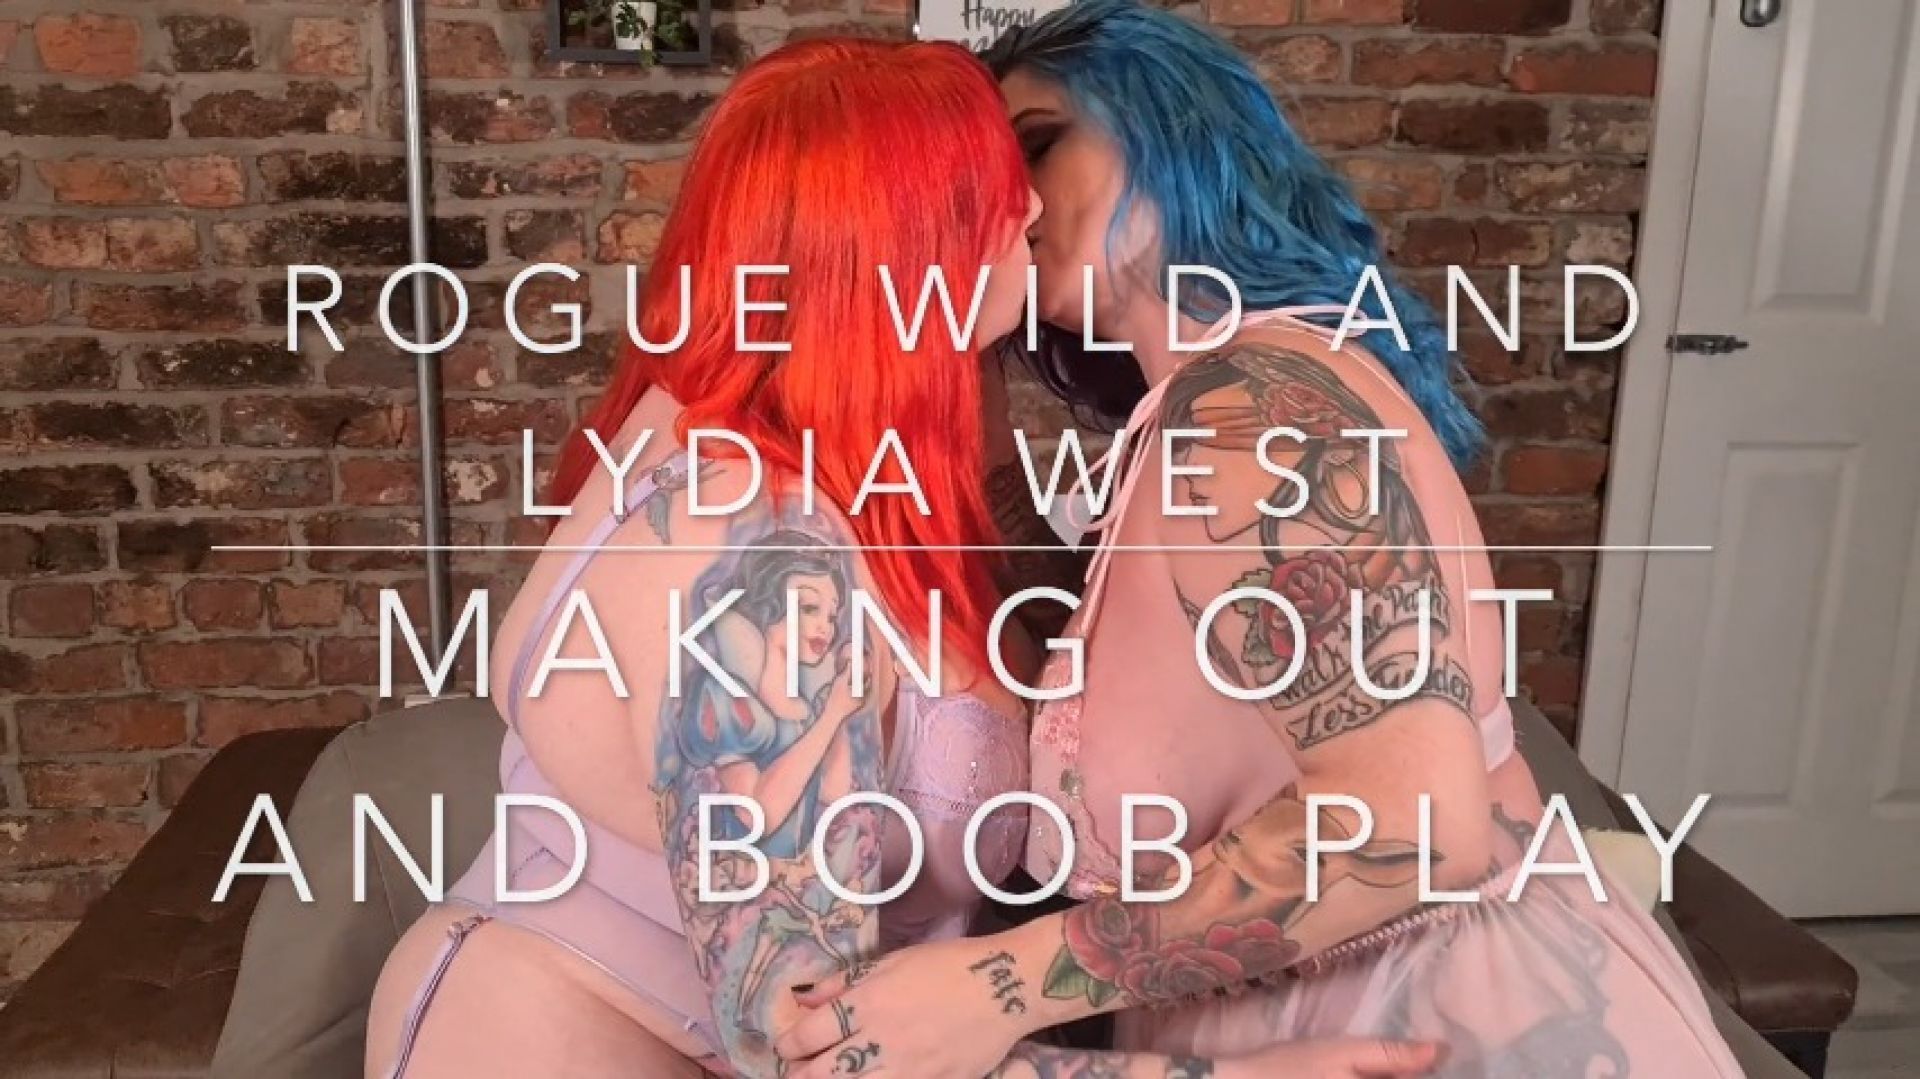 Rogue Wild and Lydia West making out and boob play